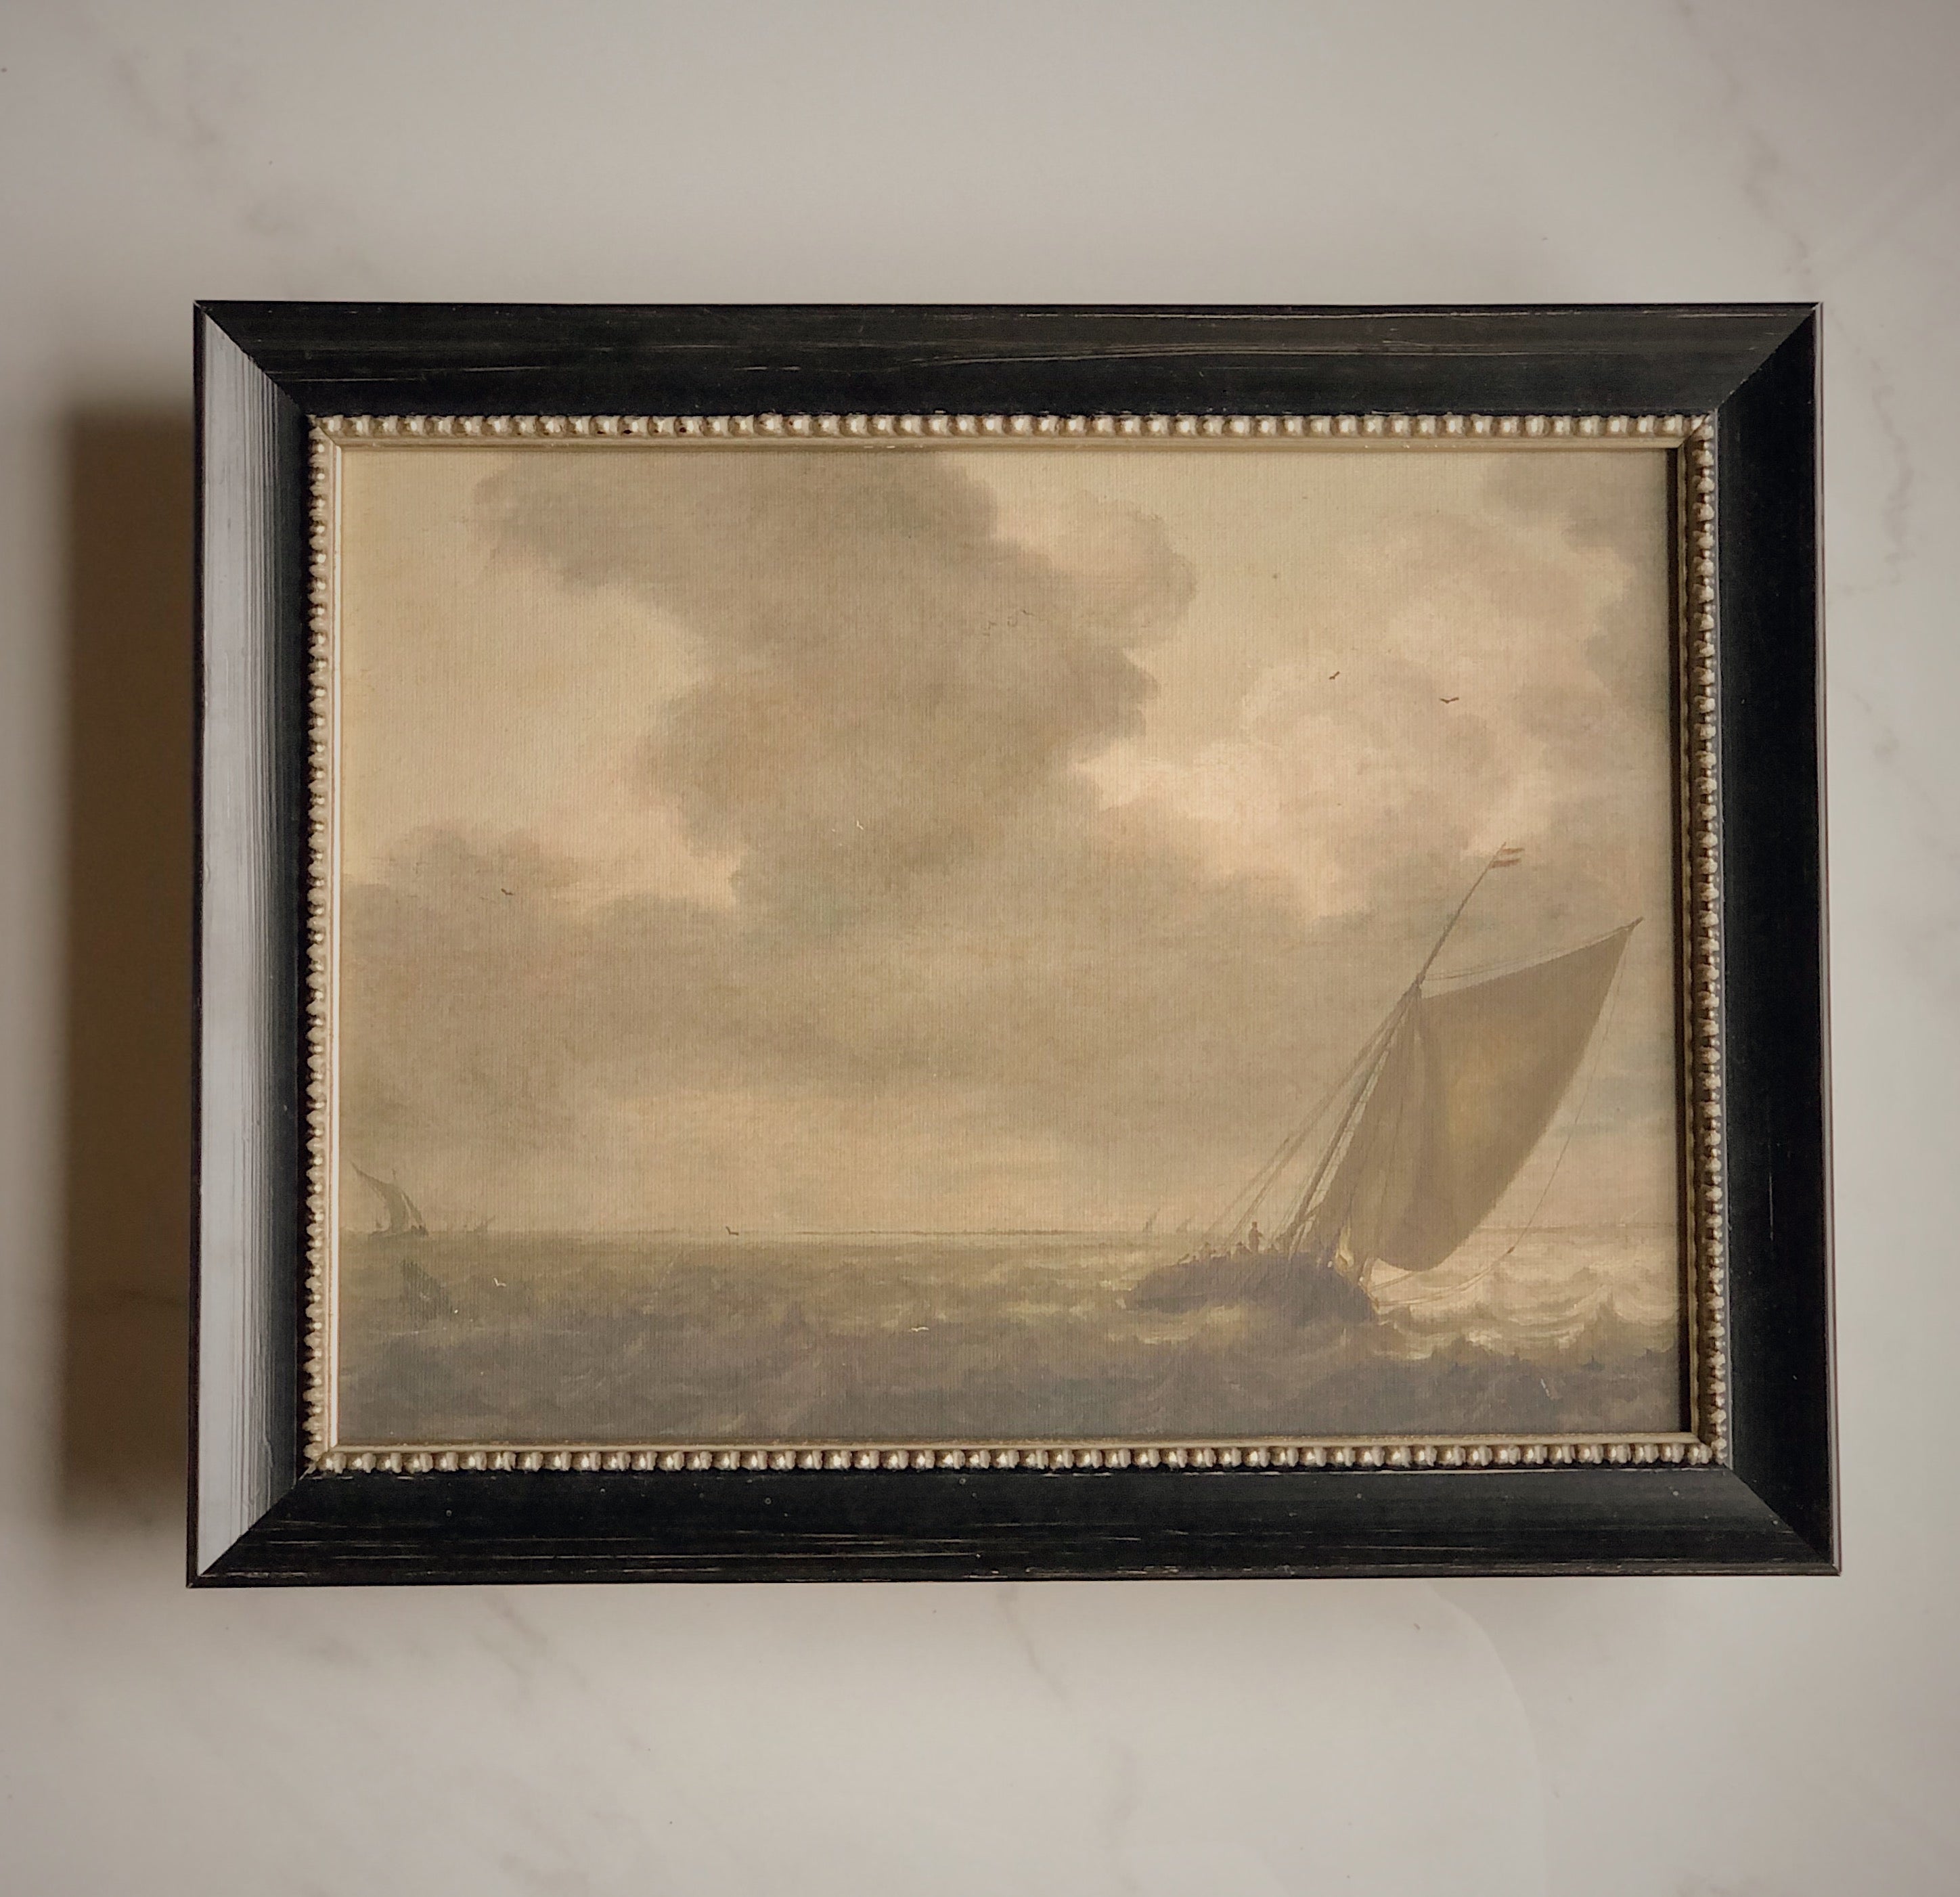  STRETCHED FLAT RIGID CANVAS - THE BOAT